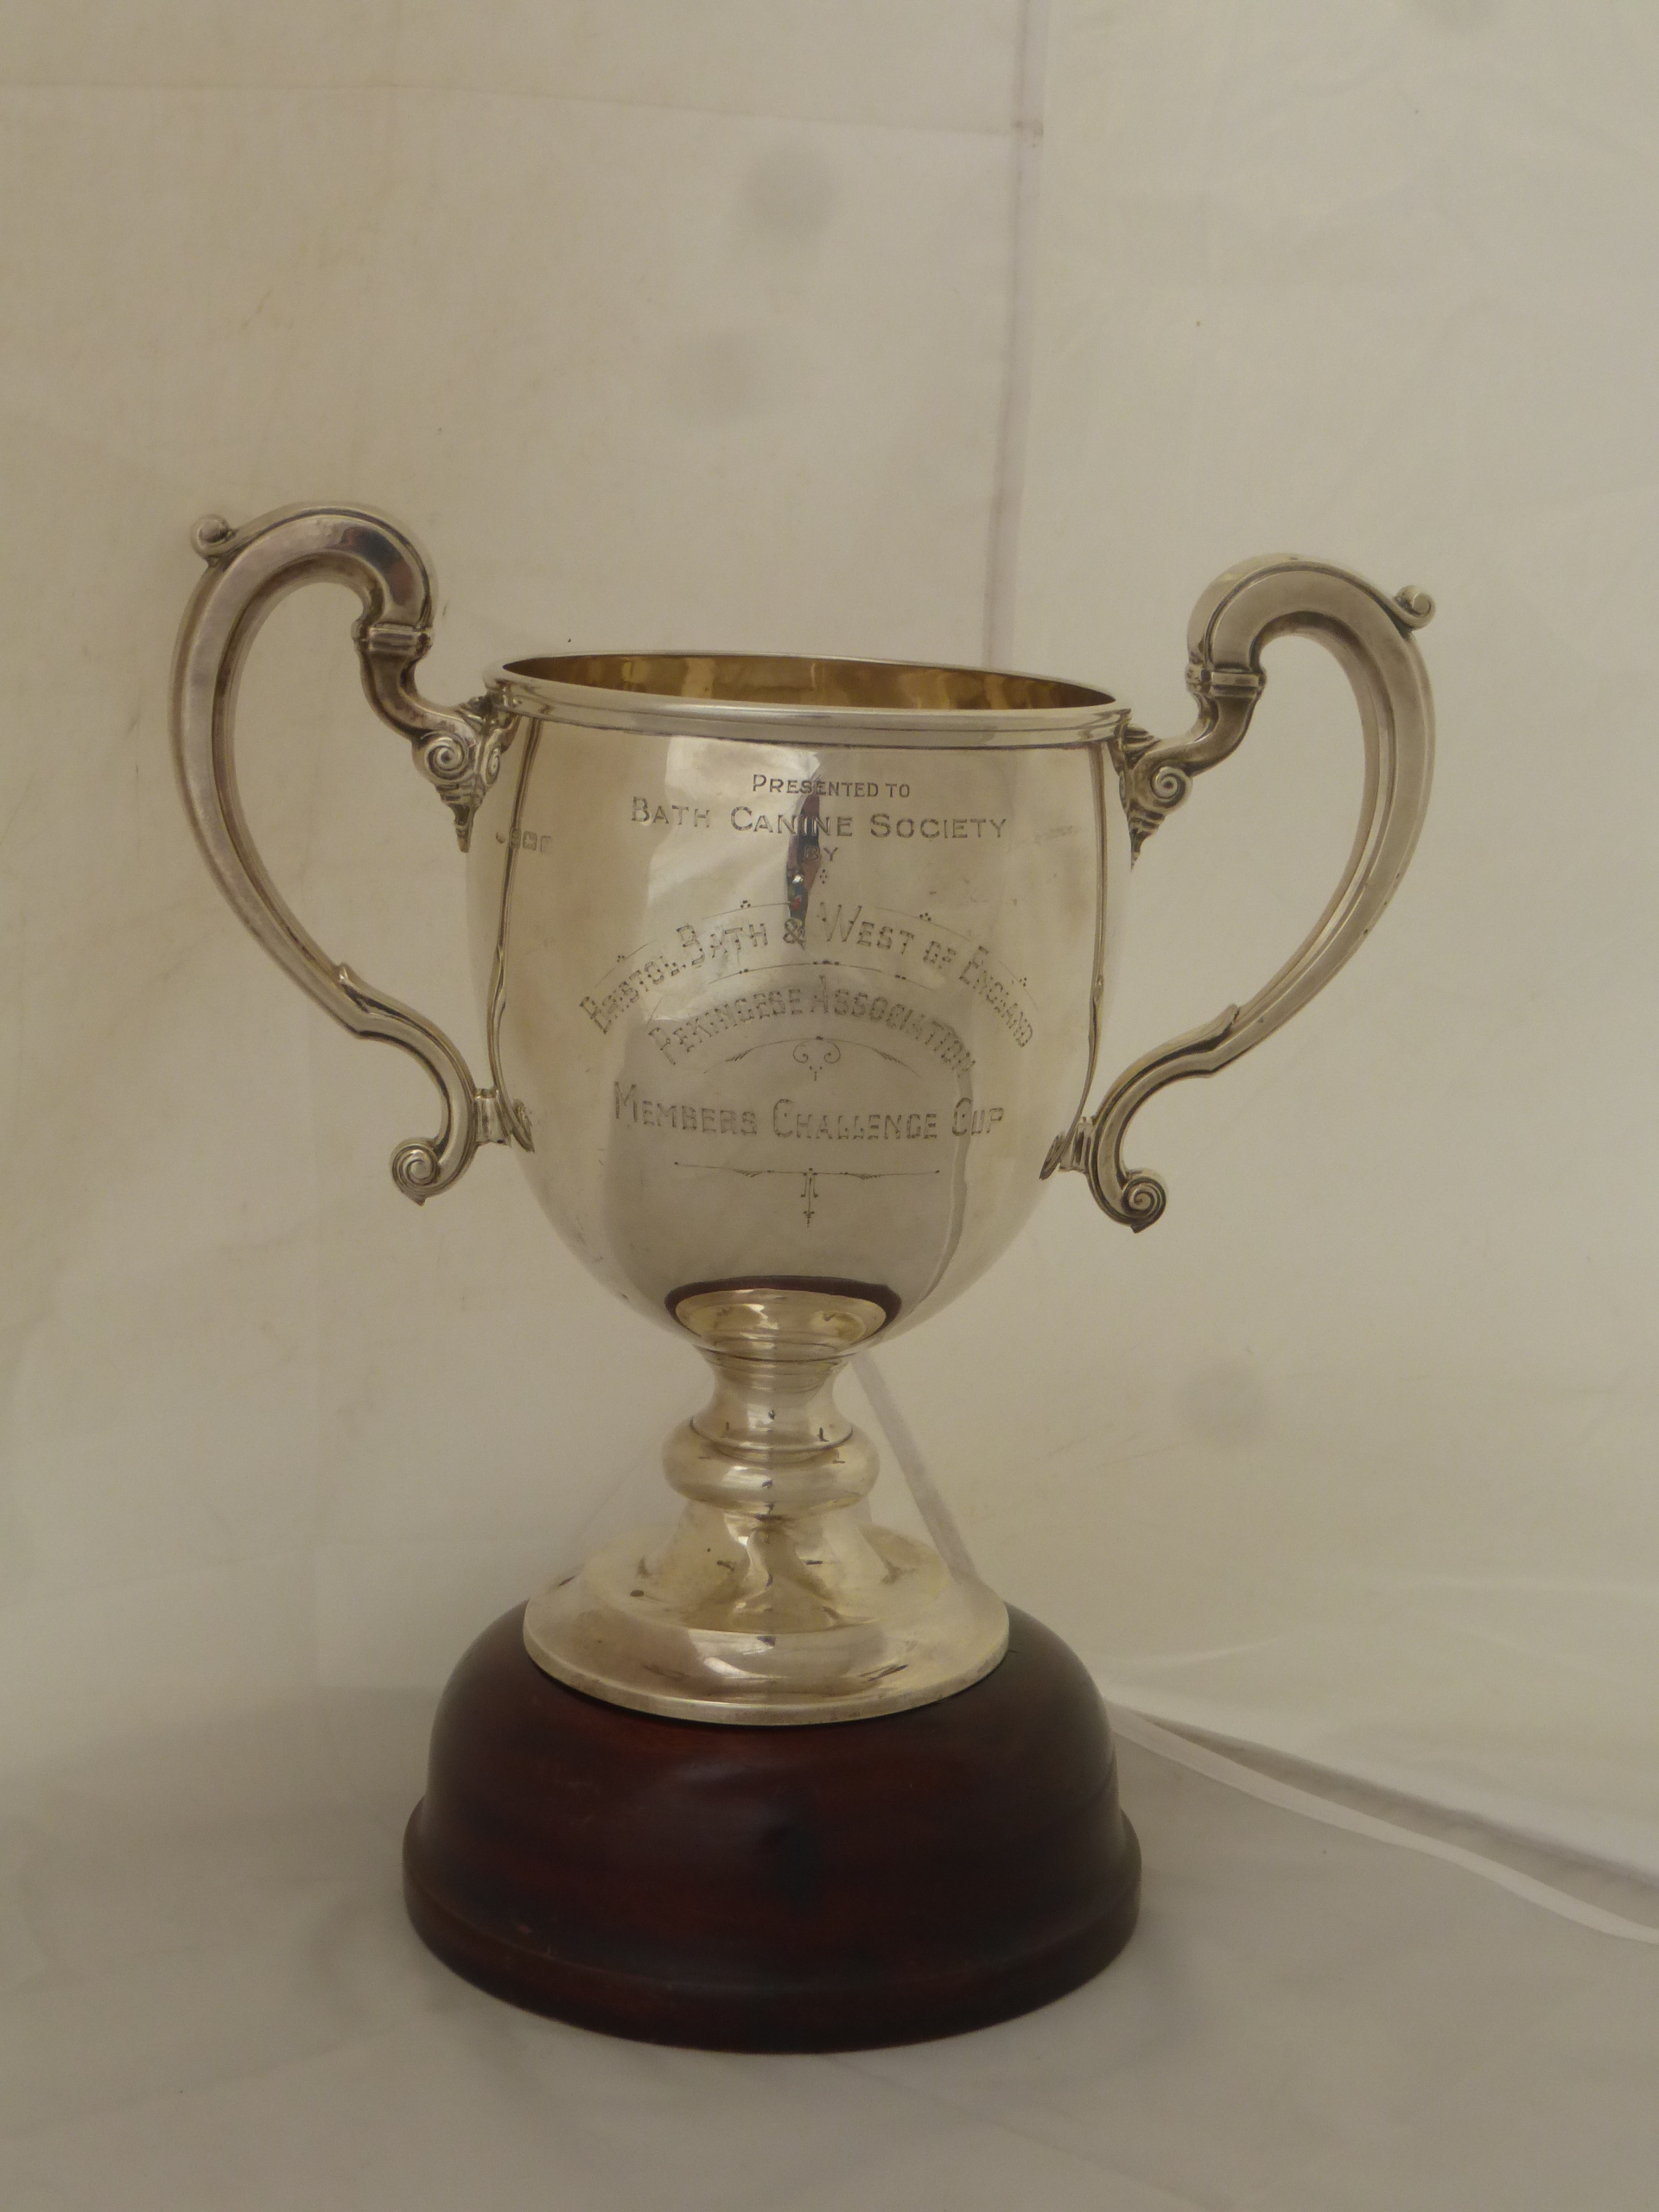 A large Balt twin handled silver trophy with inscription Presented to Bathy Canine Society by